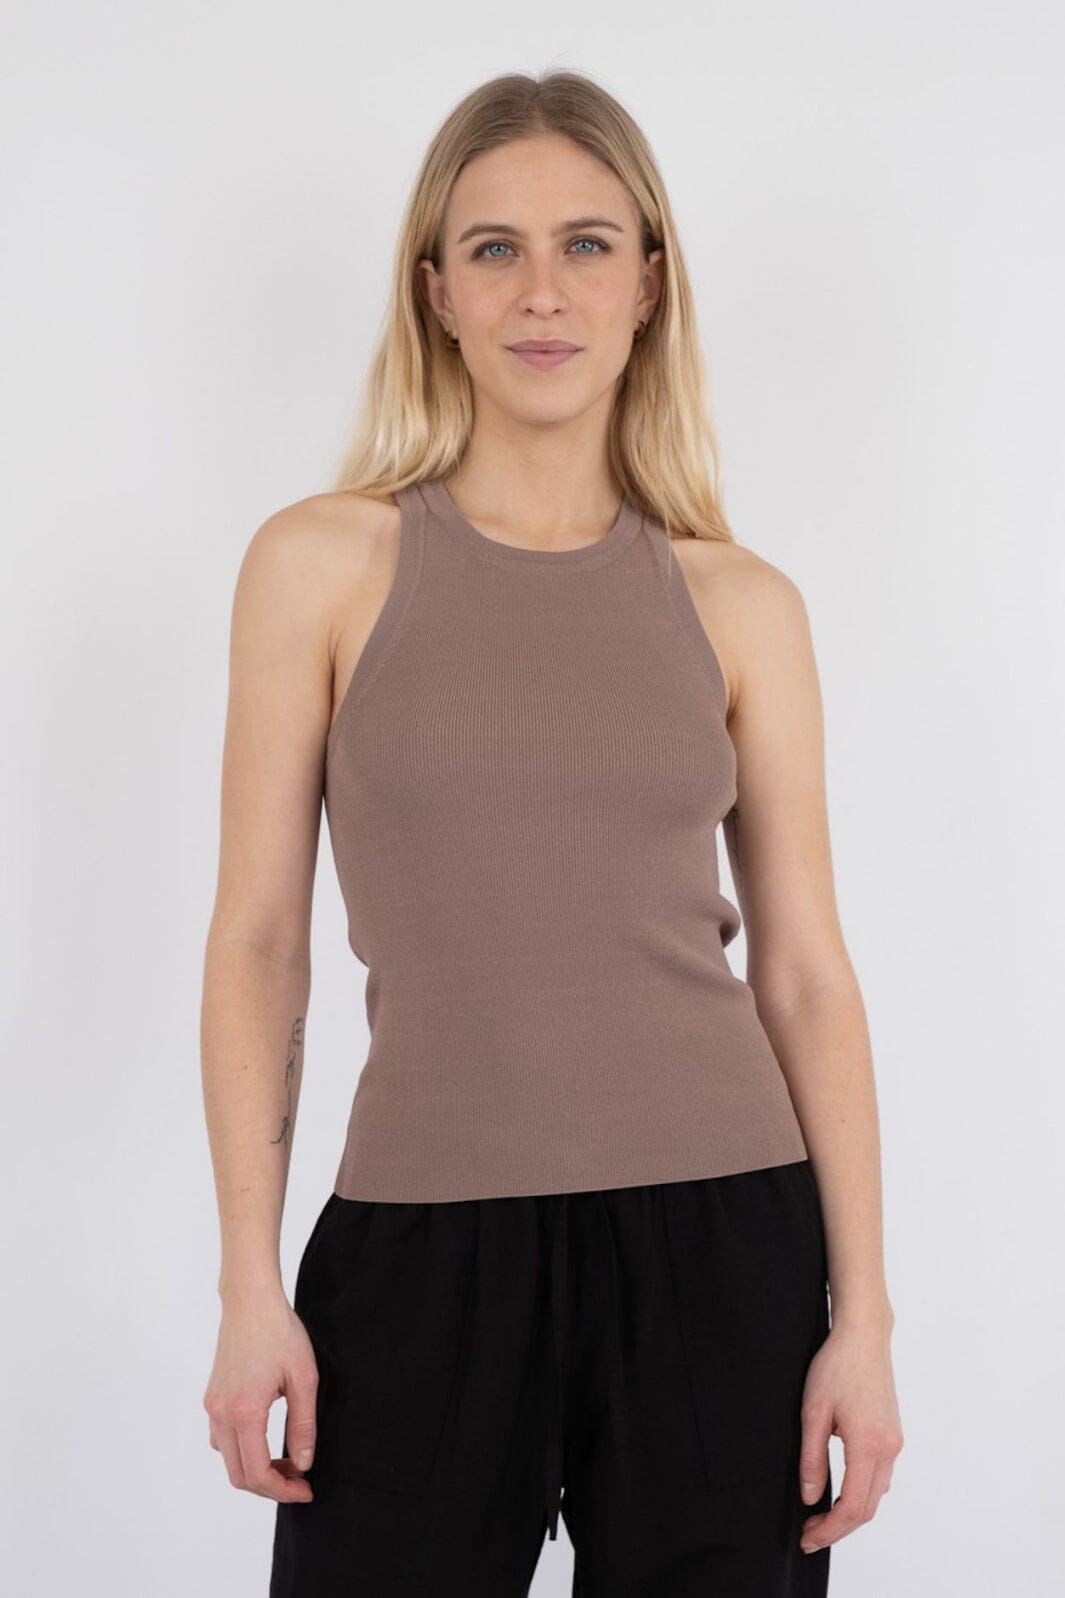 Neo Noir - Willy Knitted Top - Dusty Brown Toppe 